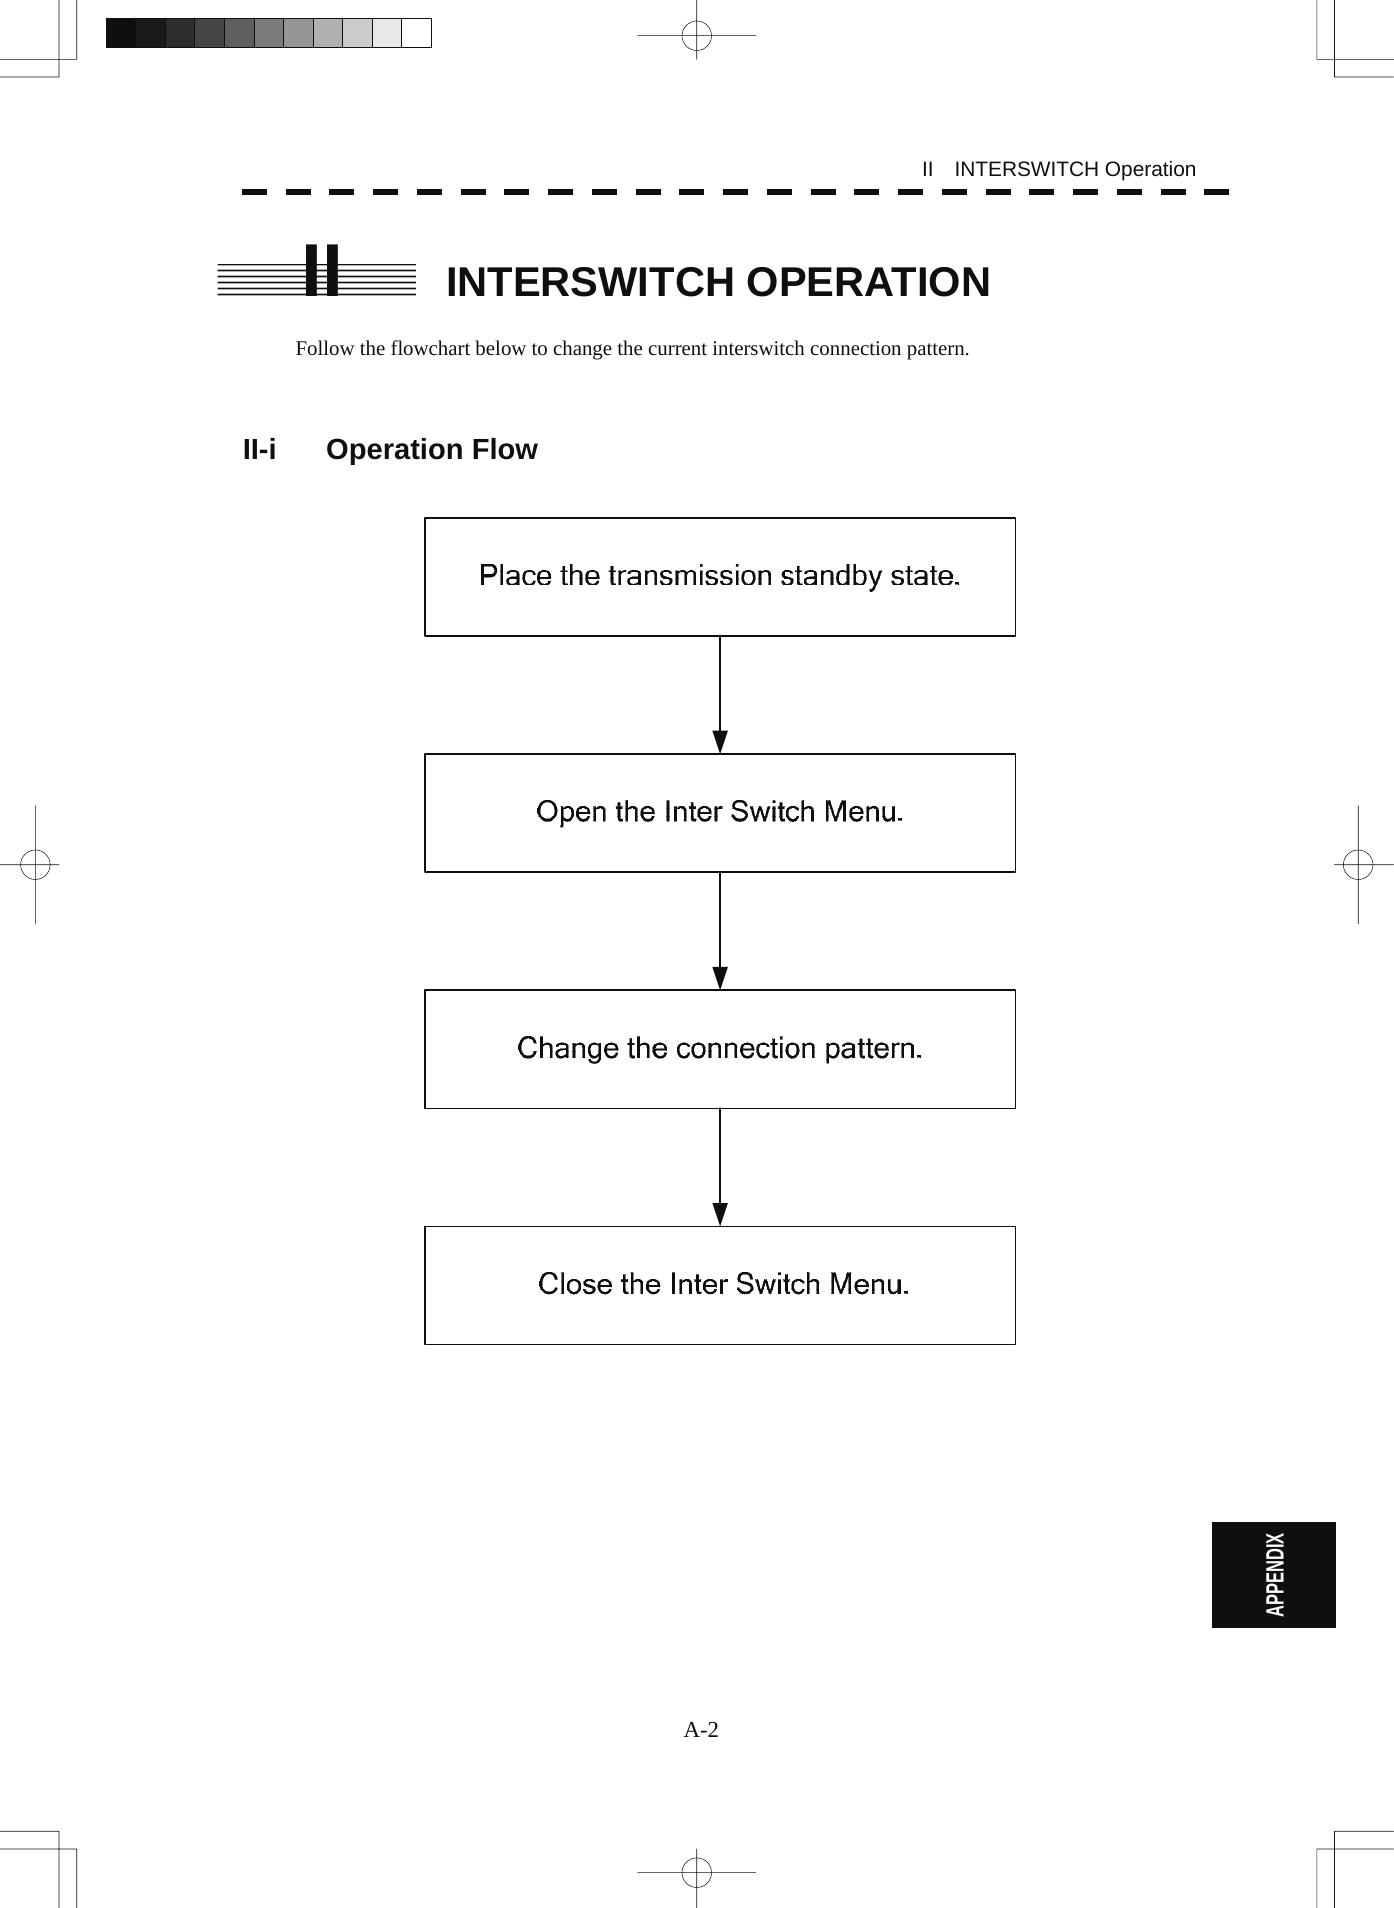  A-2 II  INTERSWITCH Operation APPENDIX II  INTERSWITCH OPERATION  Follow the flowchart below to change the current interswitch connection pattern.    II-i Operation Flow    